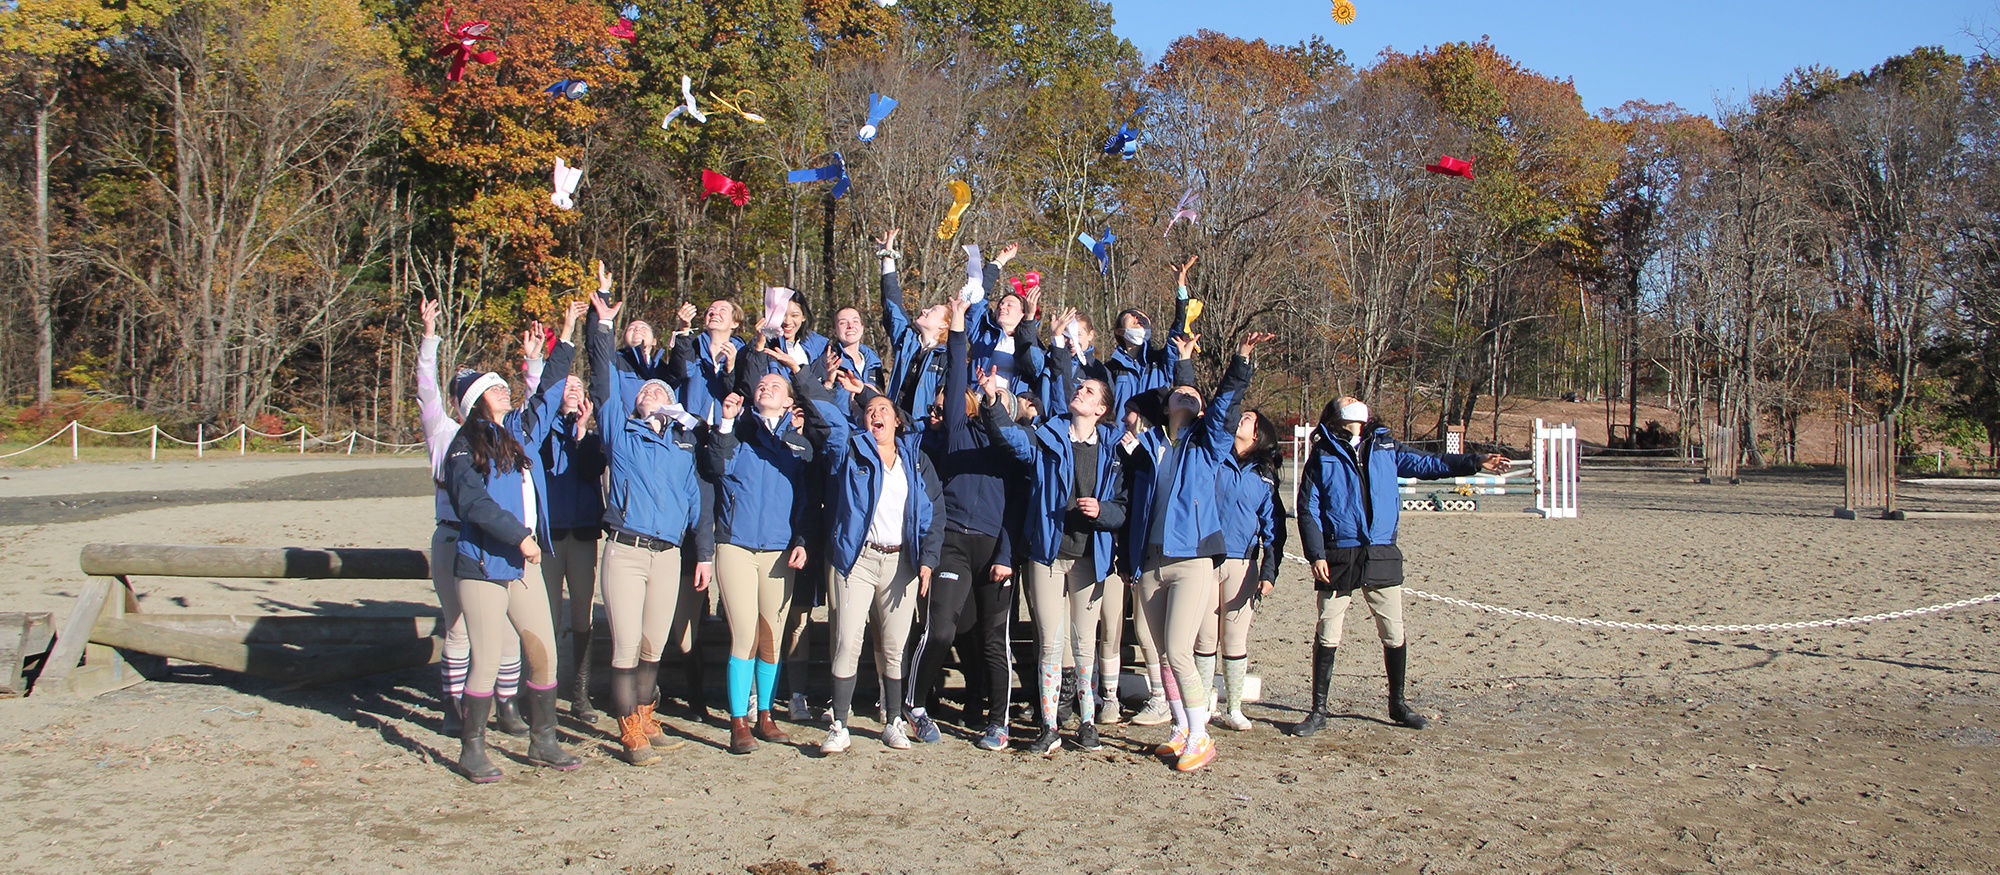 Riding Claims Third-Straight High Point College Title at Westfield State/Amherst Show